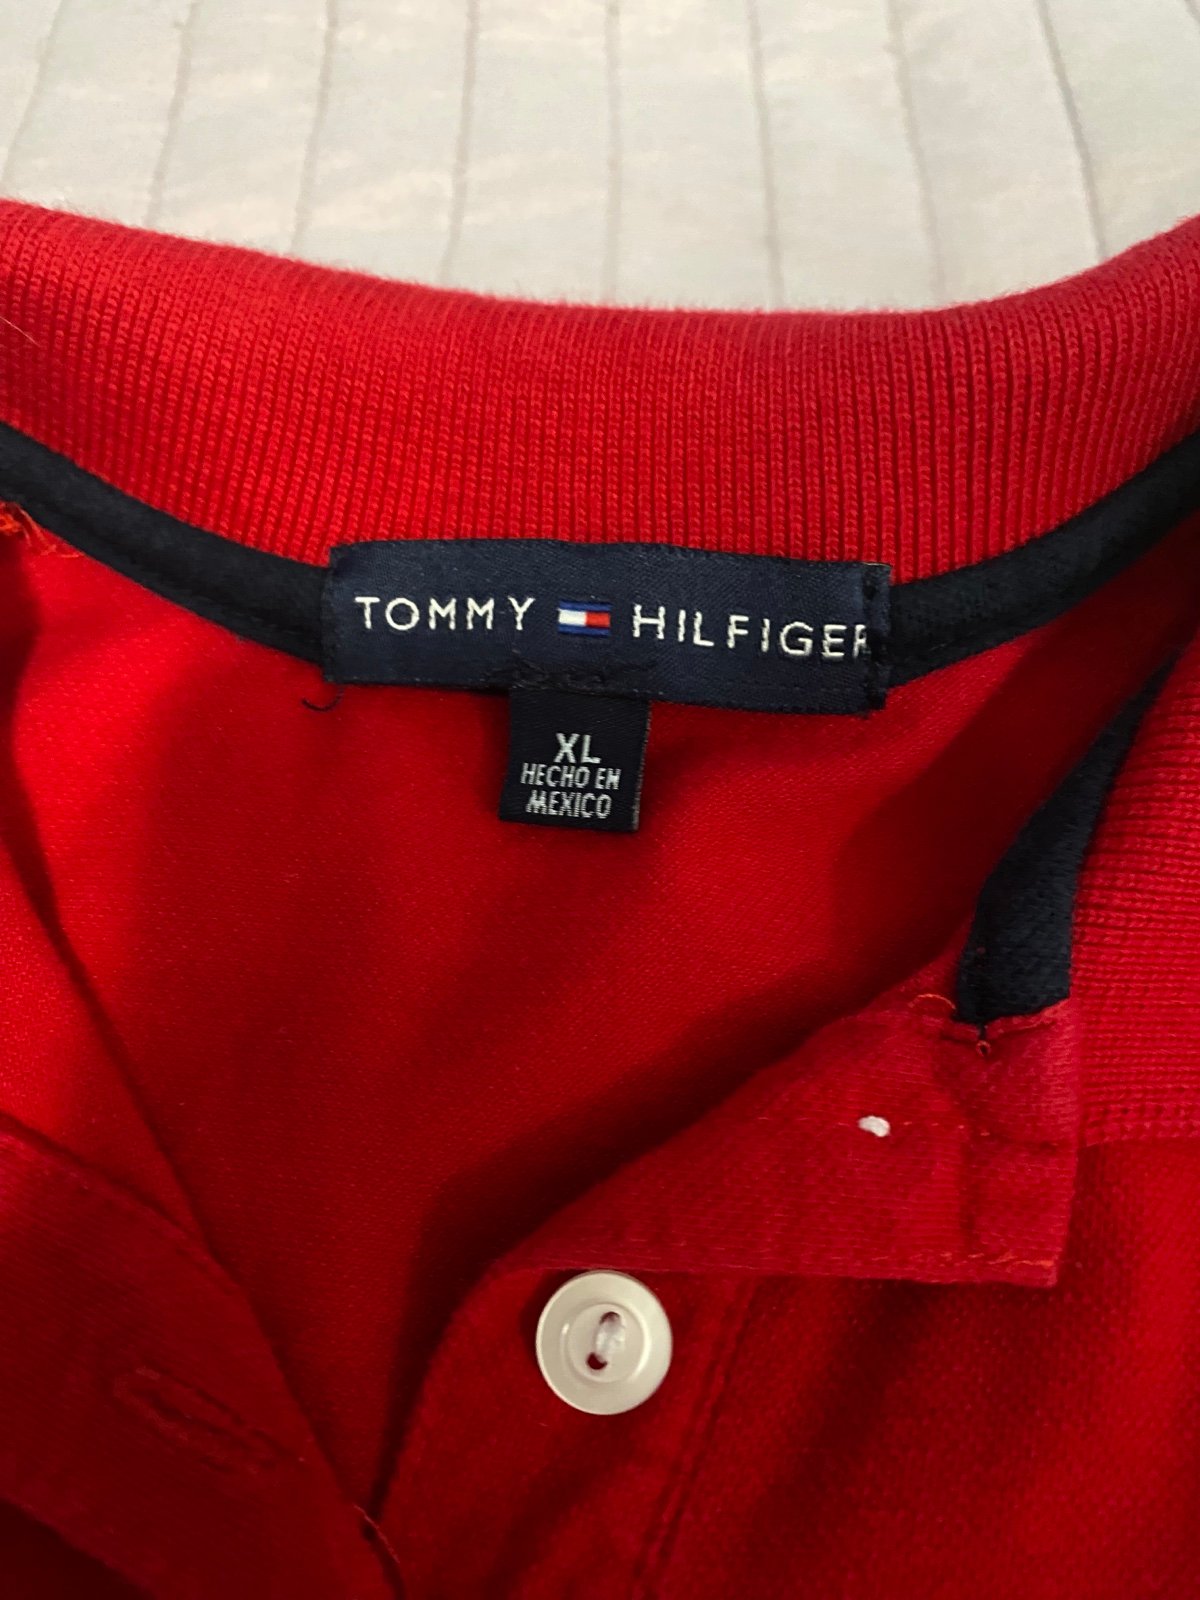 Comfortable RED TOMMY HILFIGER TOP fnnkfjhz8 Store Online